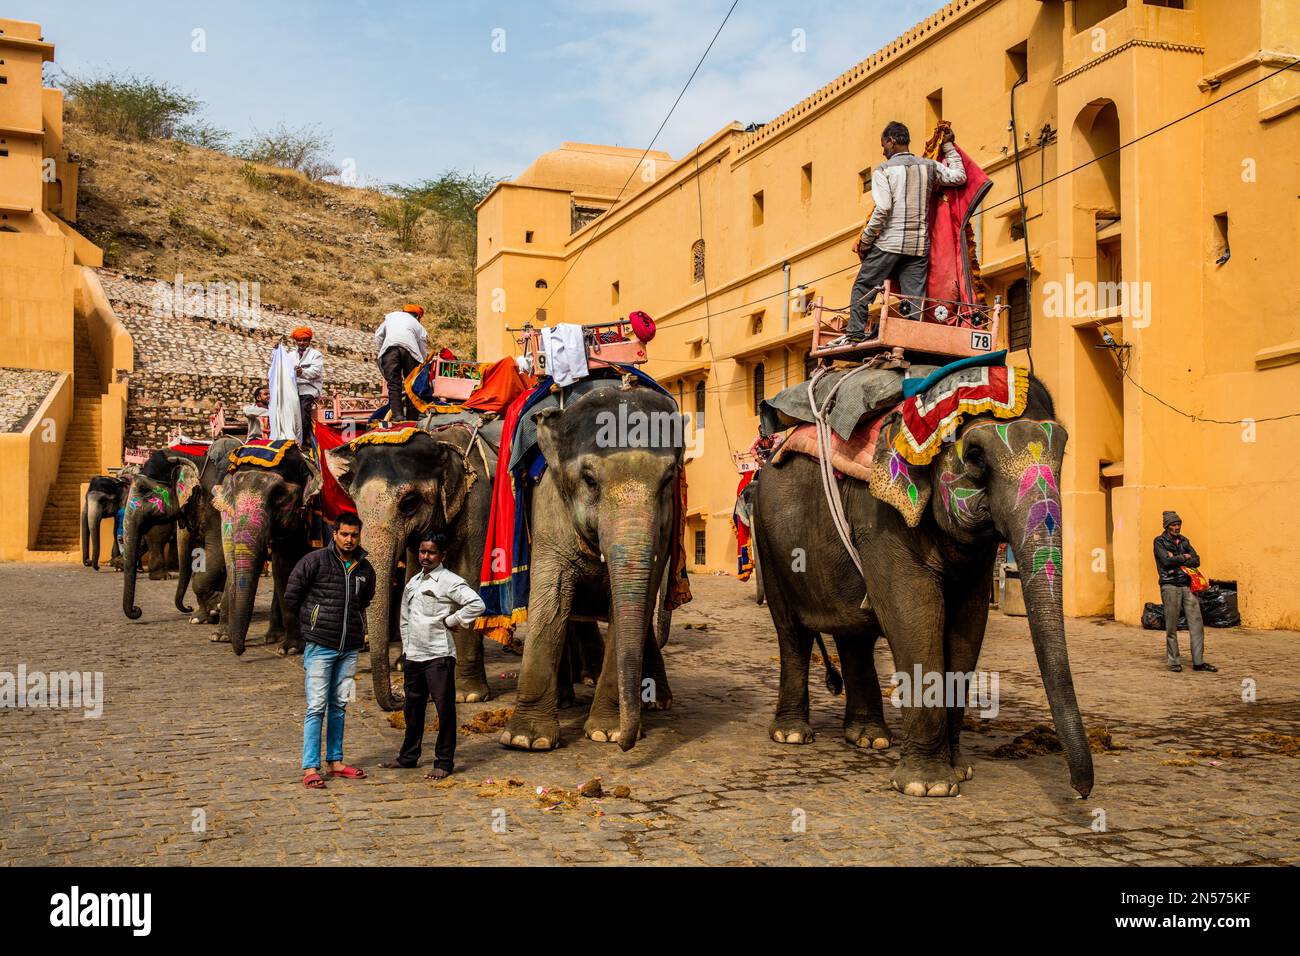 Elephants after work at the gathering place, Fort Amber, Amber, Rajasthan, India Stock Photo